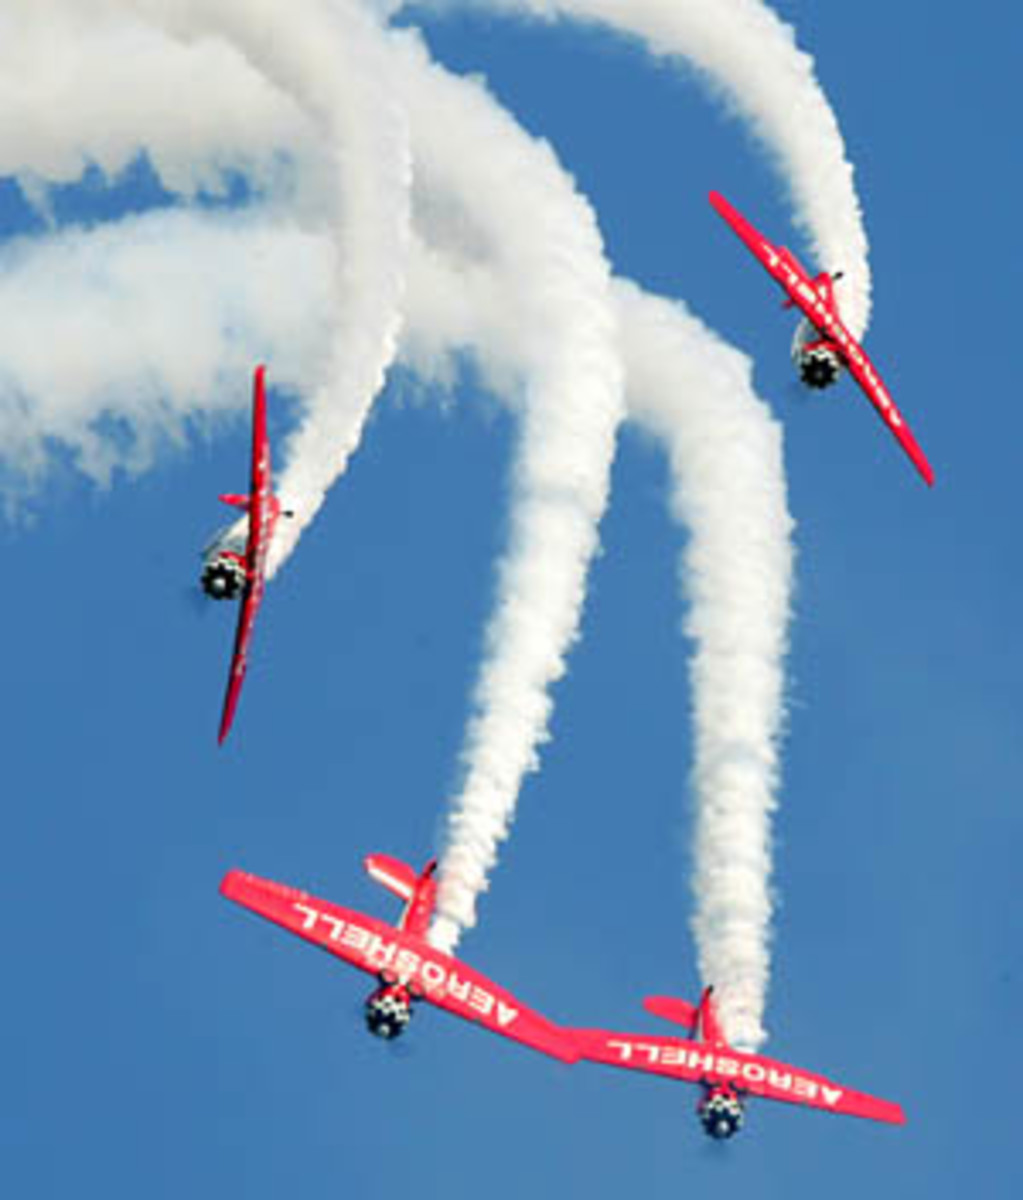 Red planes flying with white tail to promote eaa airventure Oshkosh Wisconsin